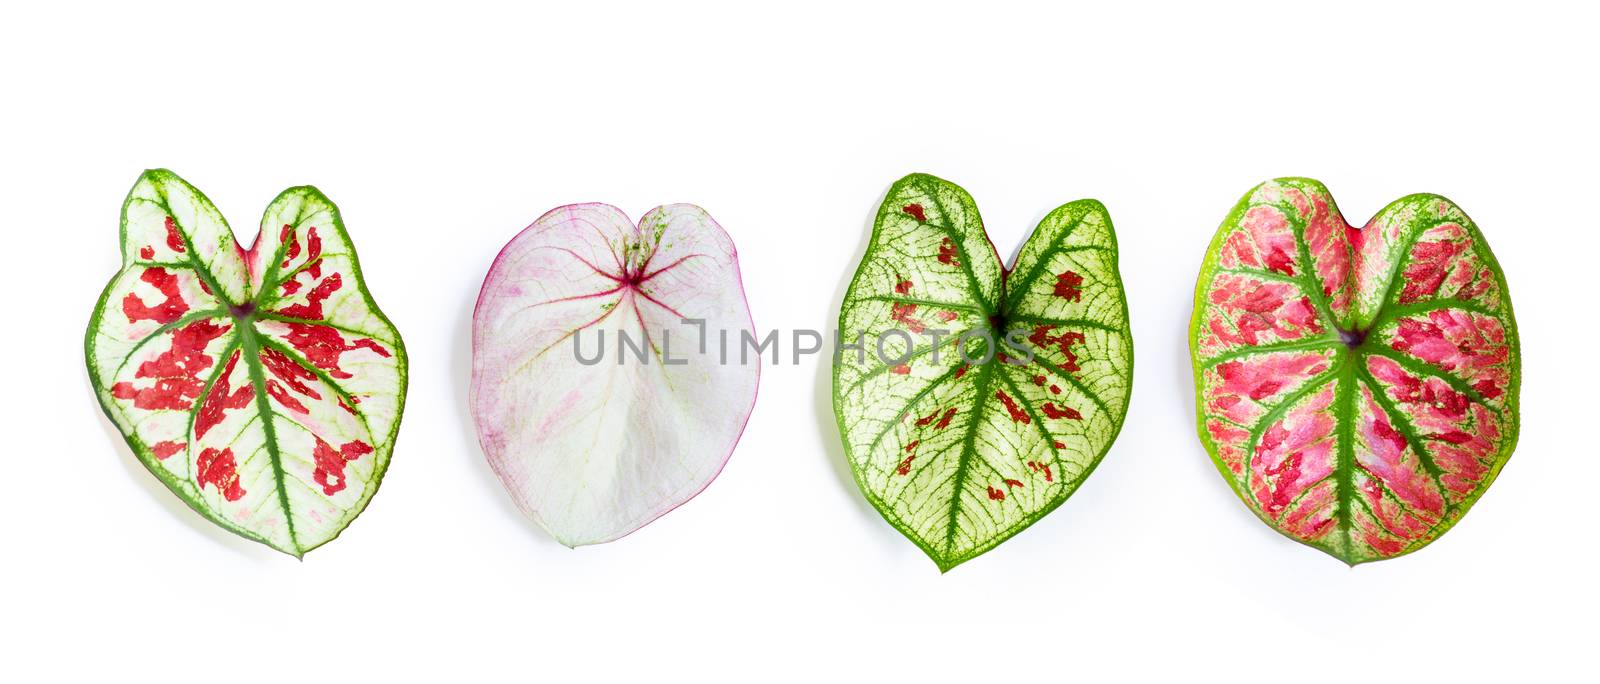 Caladium leaves on white background. Top view